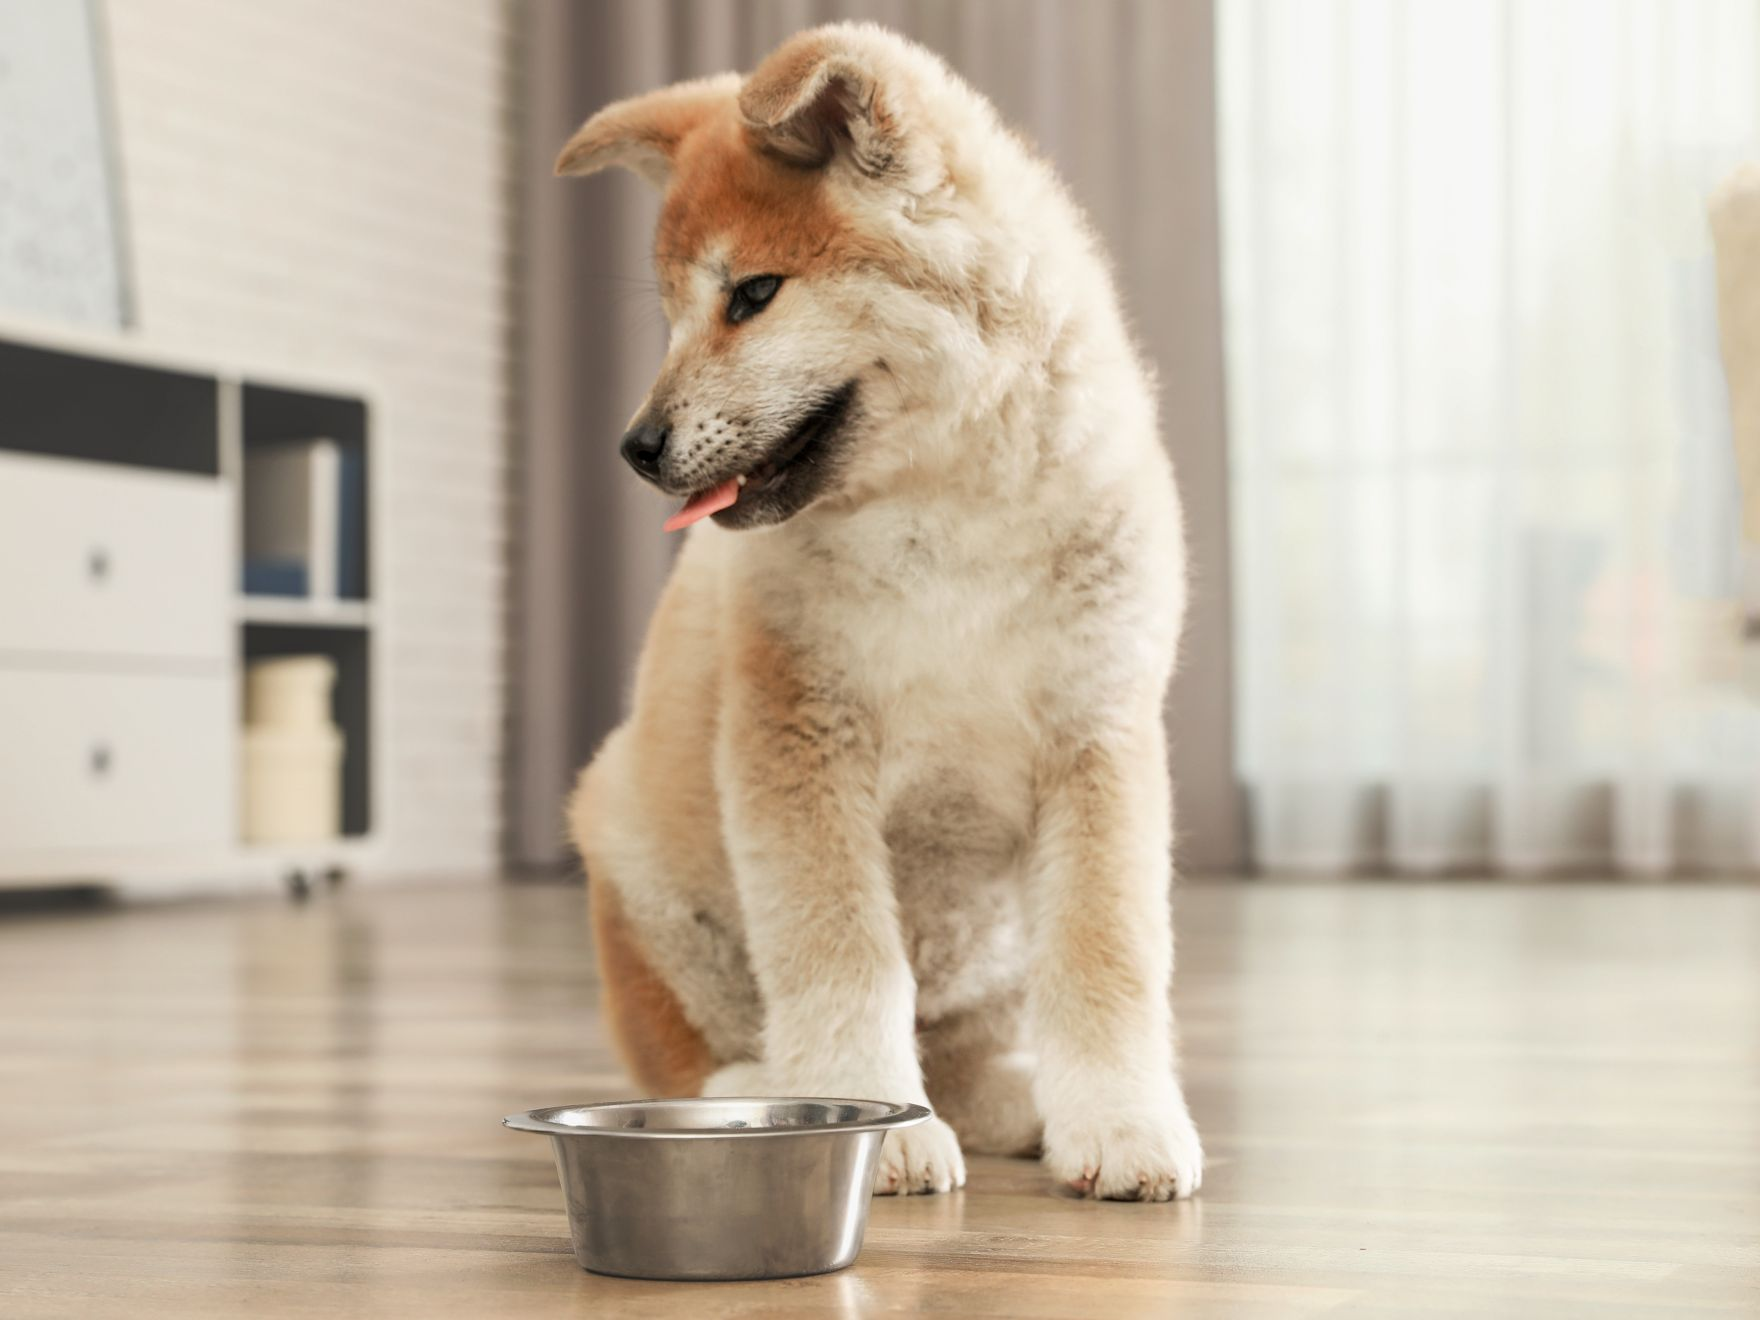 Akita puppy sitting indoors on a wooden floor next to a stainless steel bowl